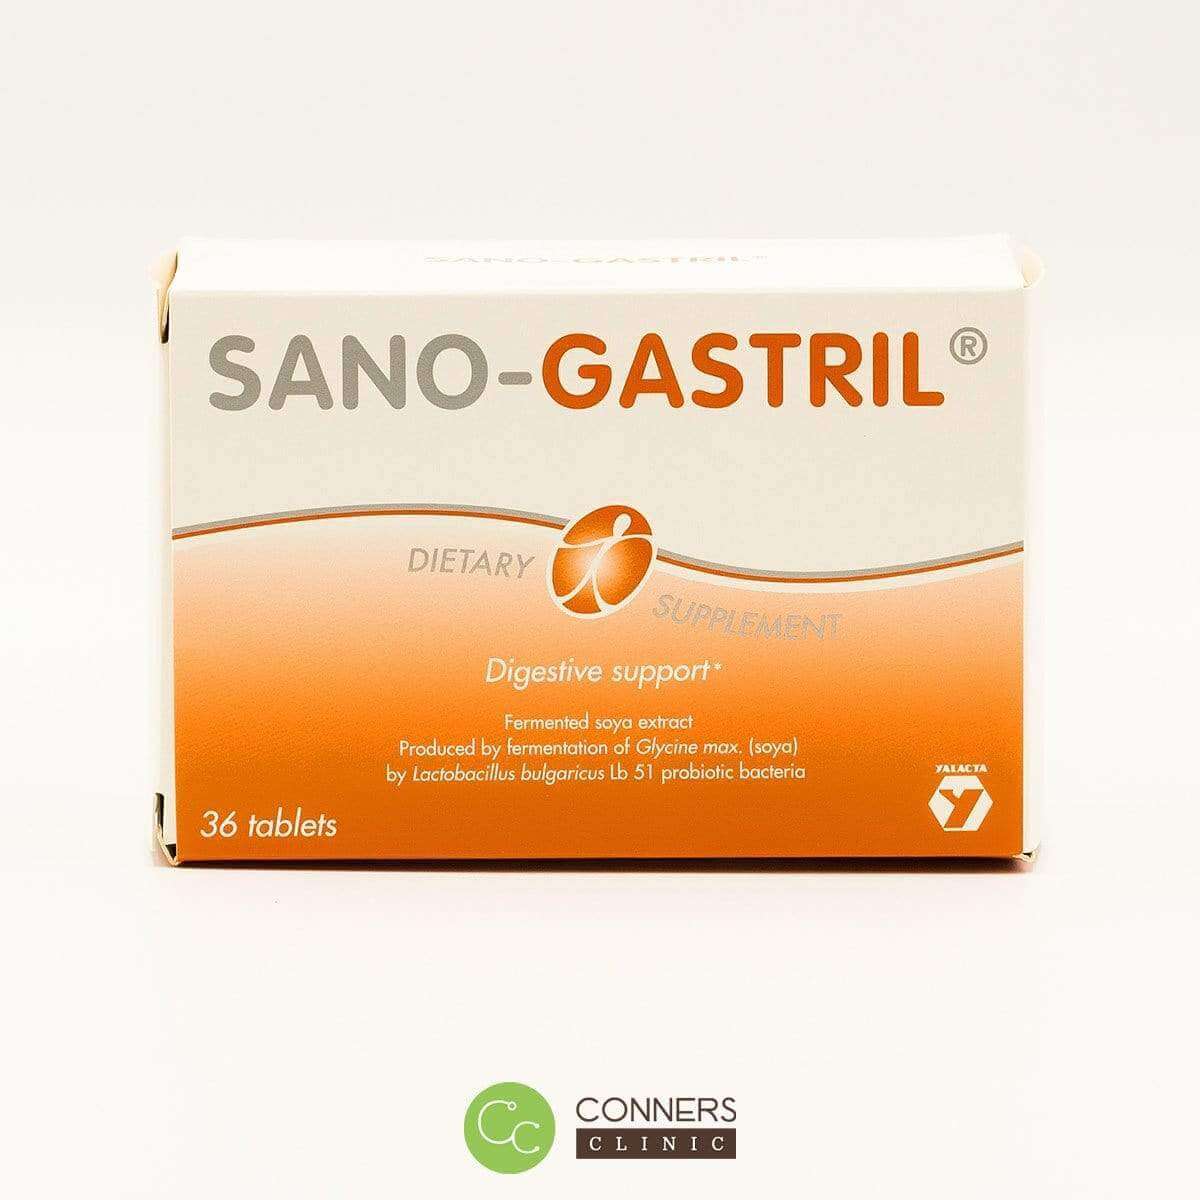 Sano-Gastril- 36 tabs Allergy Research Group Supplement - Conners Clinic